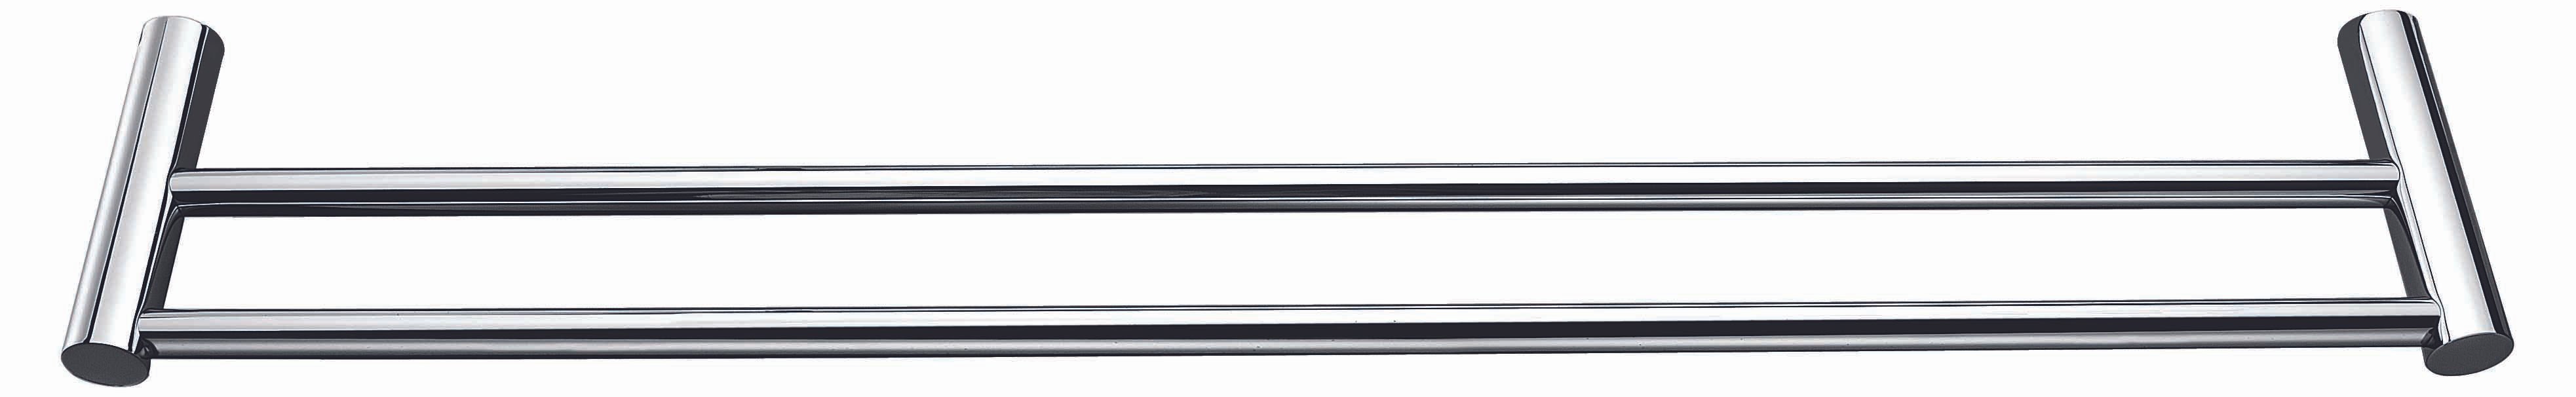 Bathroom Accessories Double Towel Rail Grade 304 Stainless Steel 635mm